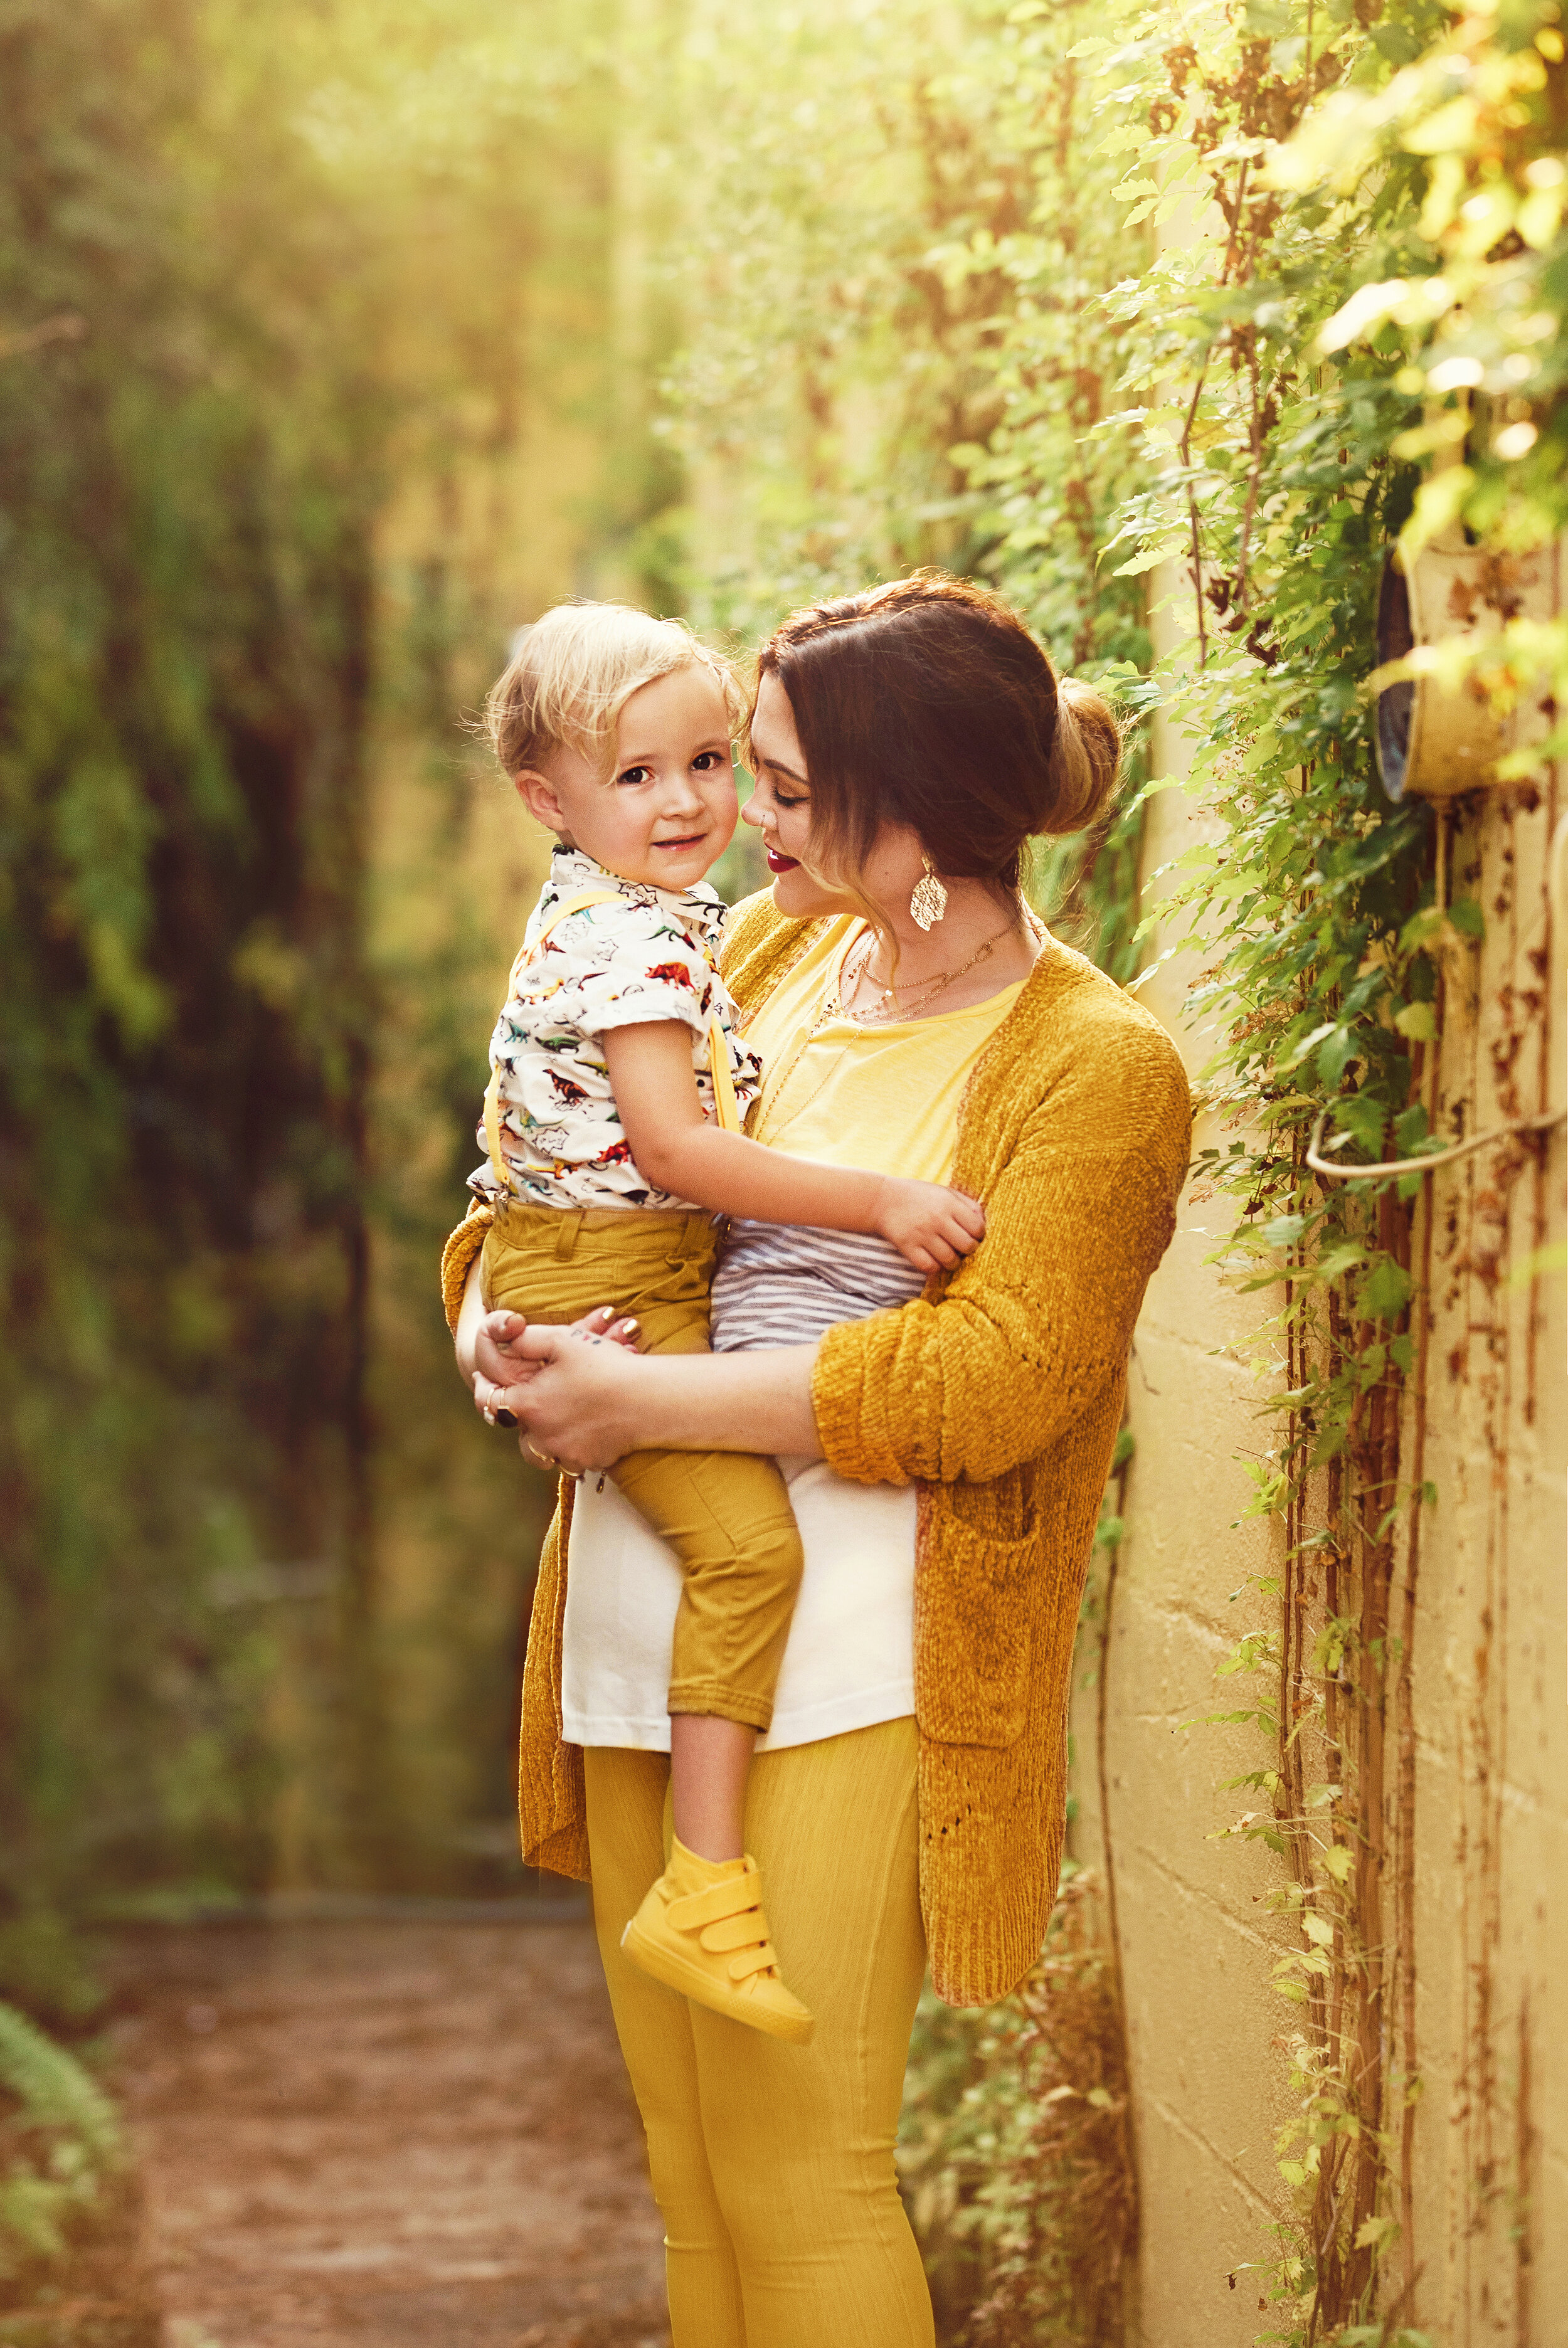 Erika Pearce Photography | Maternity and Birth | Youngest Son Ark Harrison Photoshoot | Kids in Color Yellow